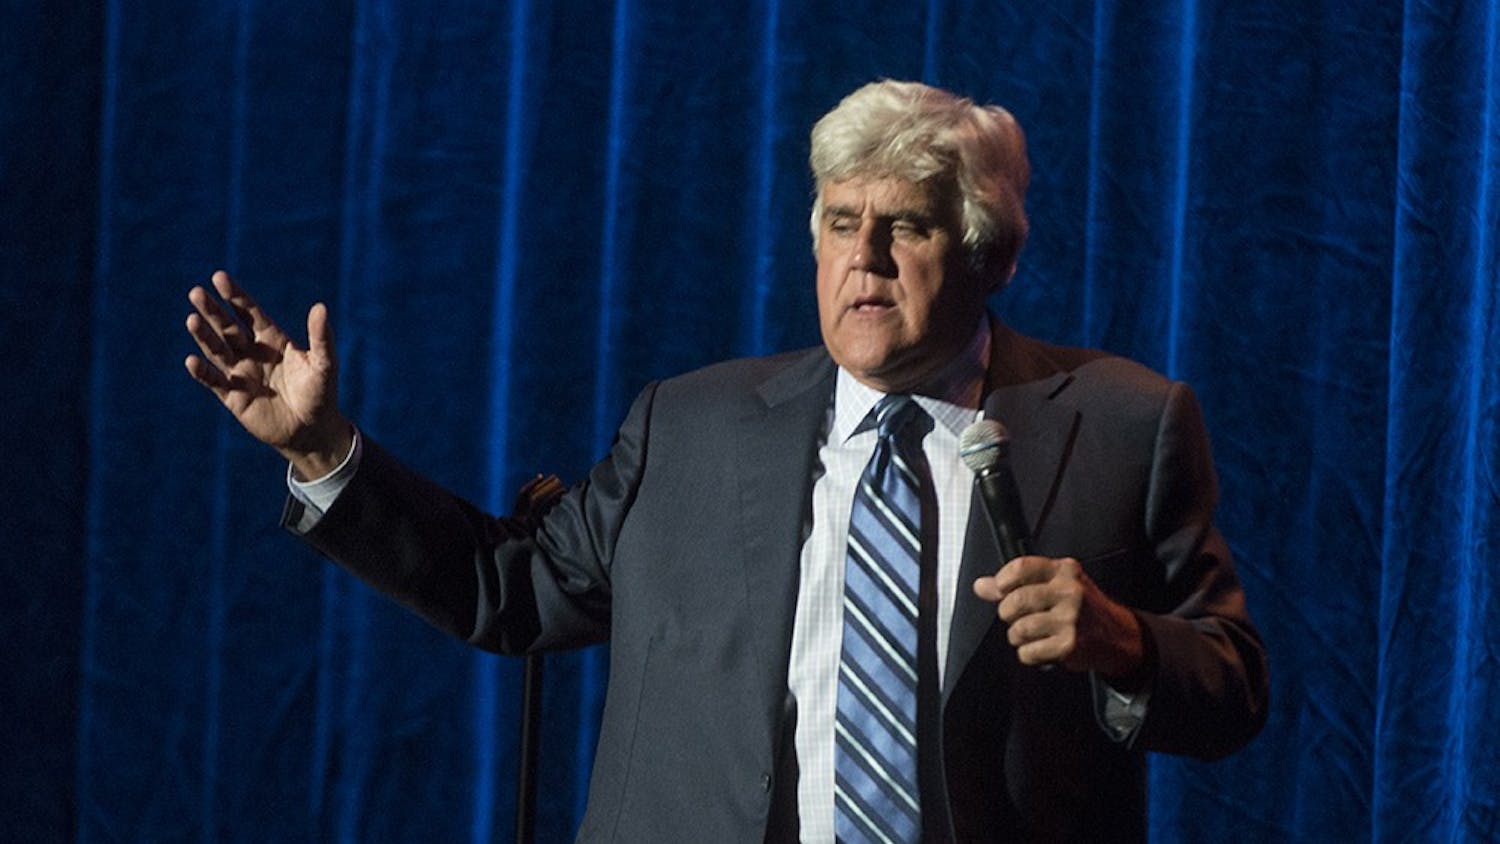 Jay Leno performs his stand up comedy routine Friday at the IU Auditorium.